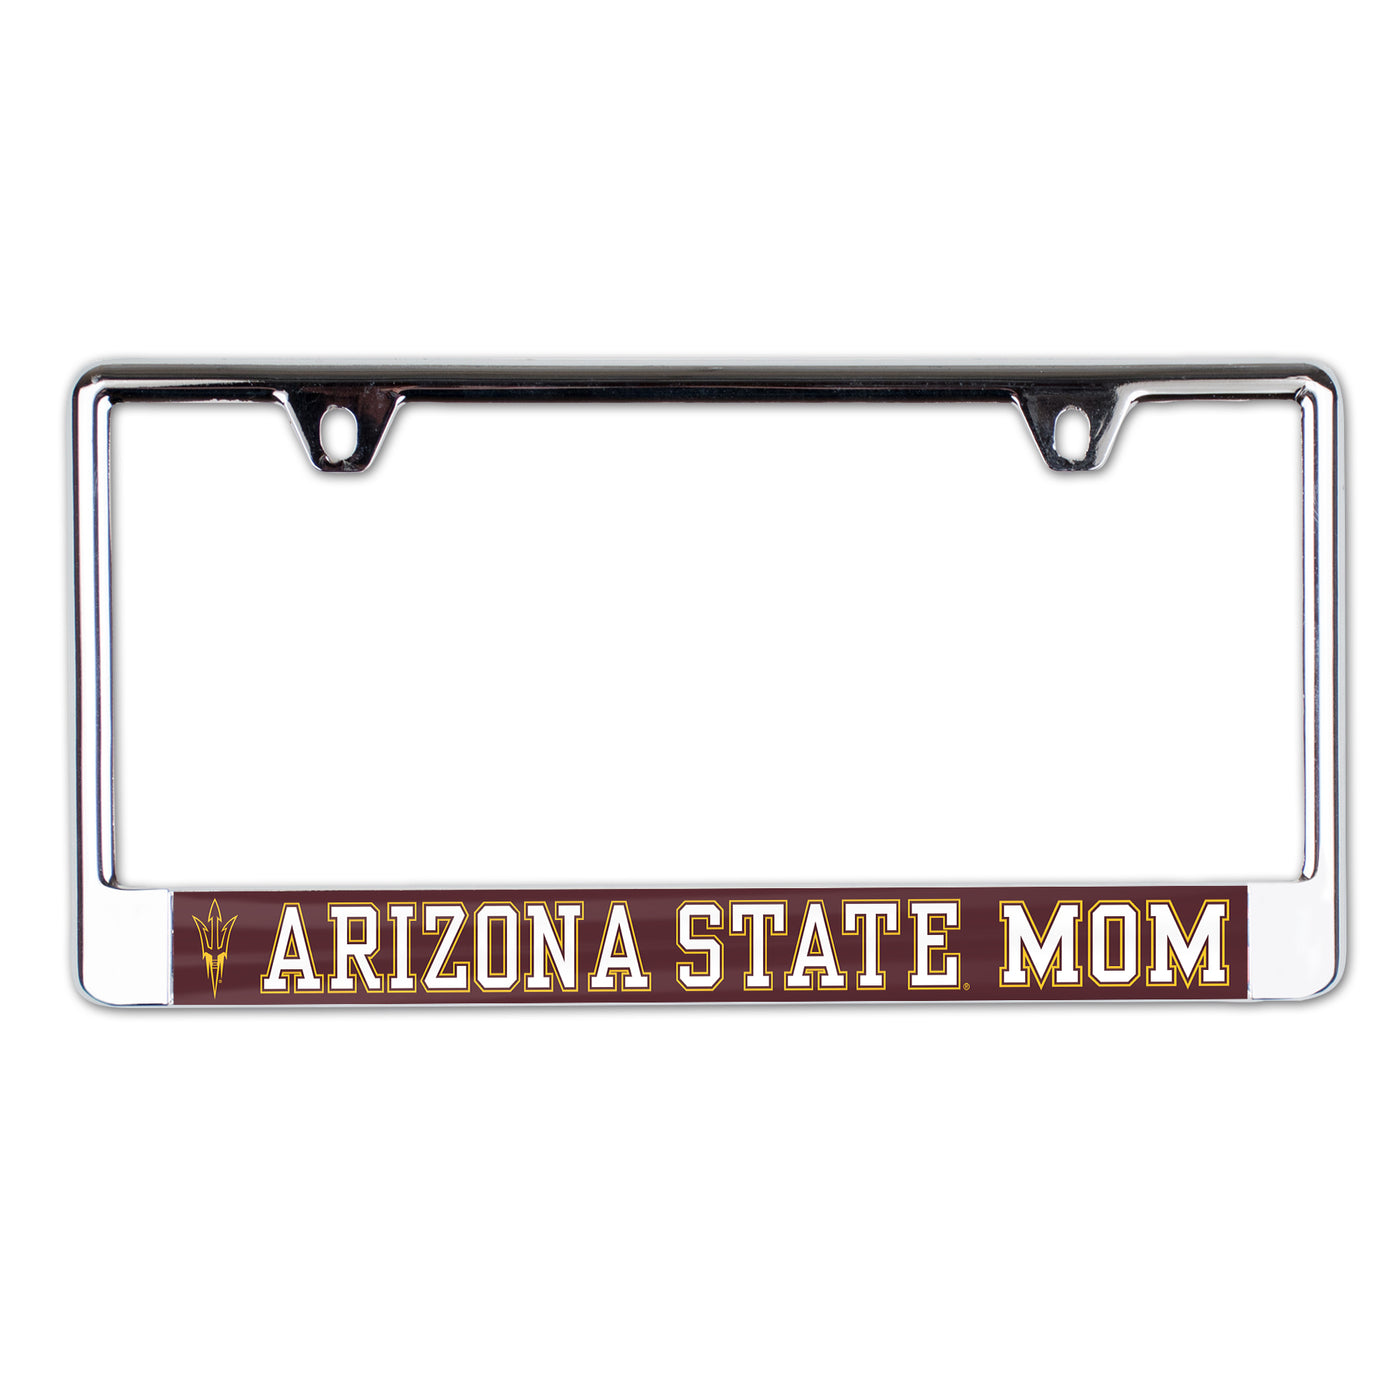 ASU license plate frame with maroon bottom with a pitchfork and 'Arizona State Mom' lettering